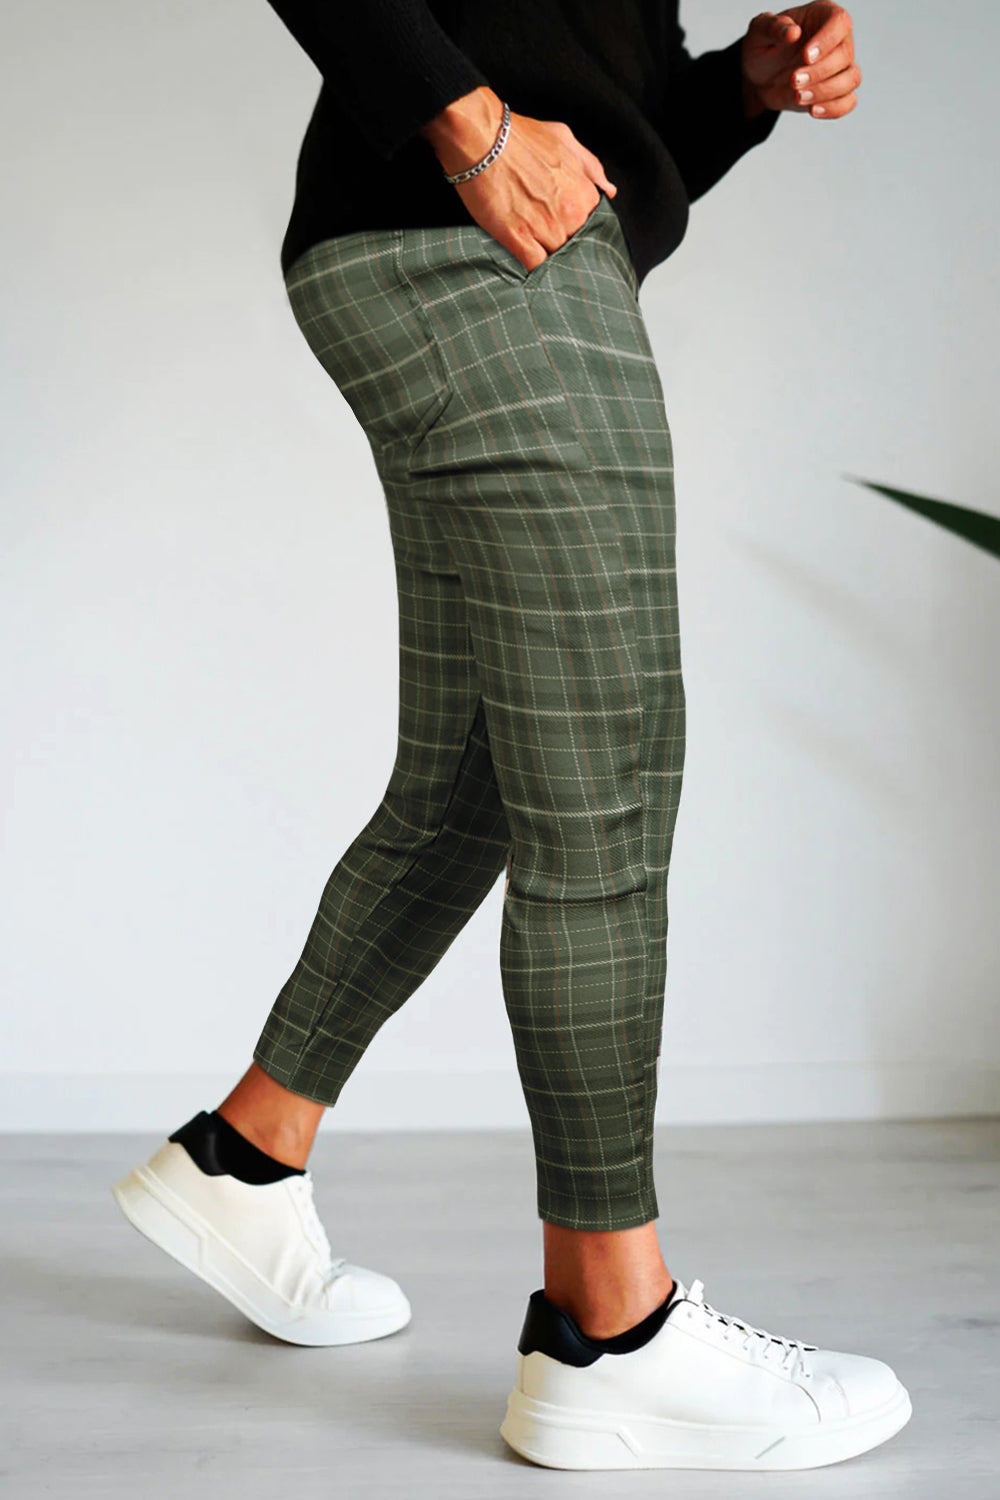 Men's Relaxed Chino Pant - Green Lattice